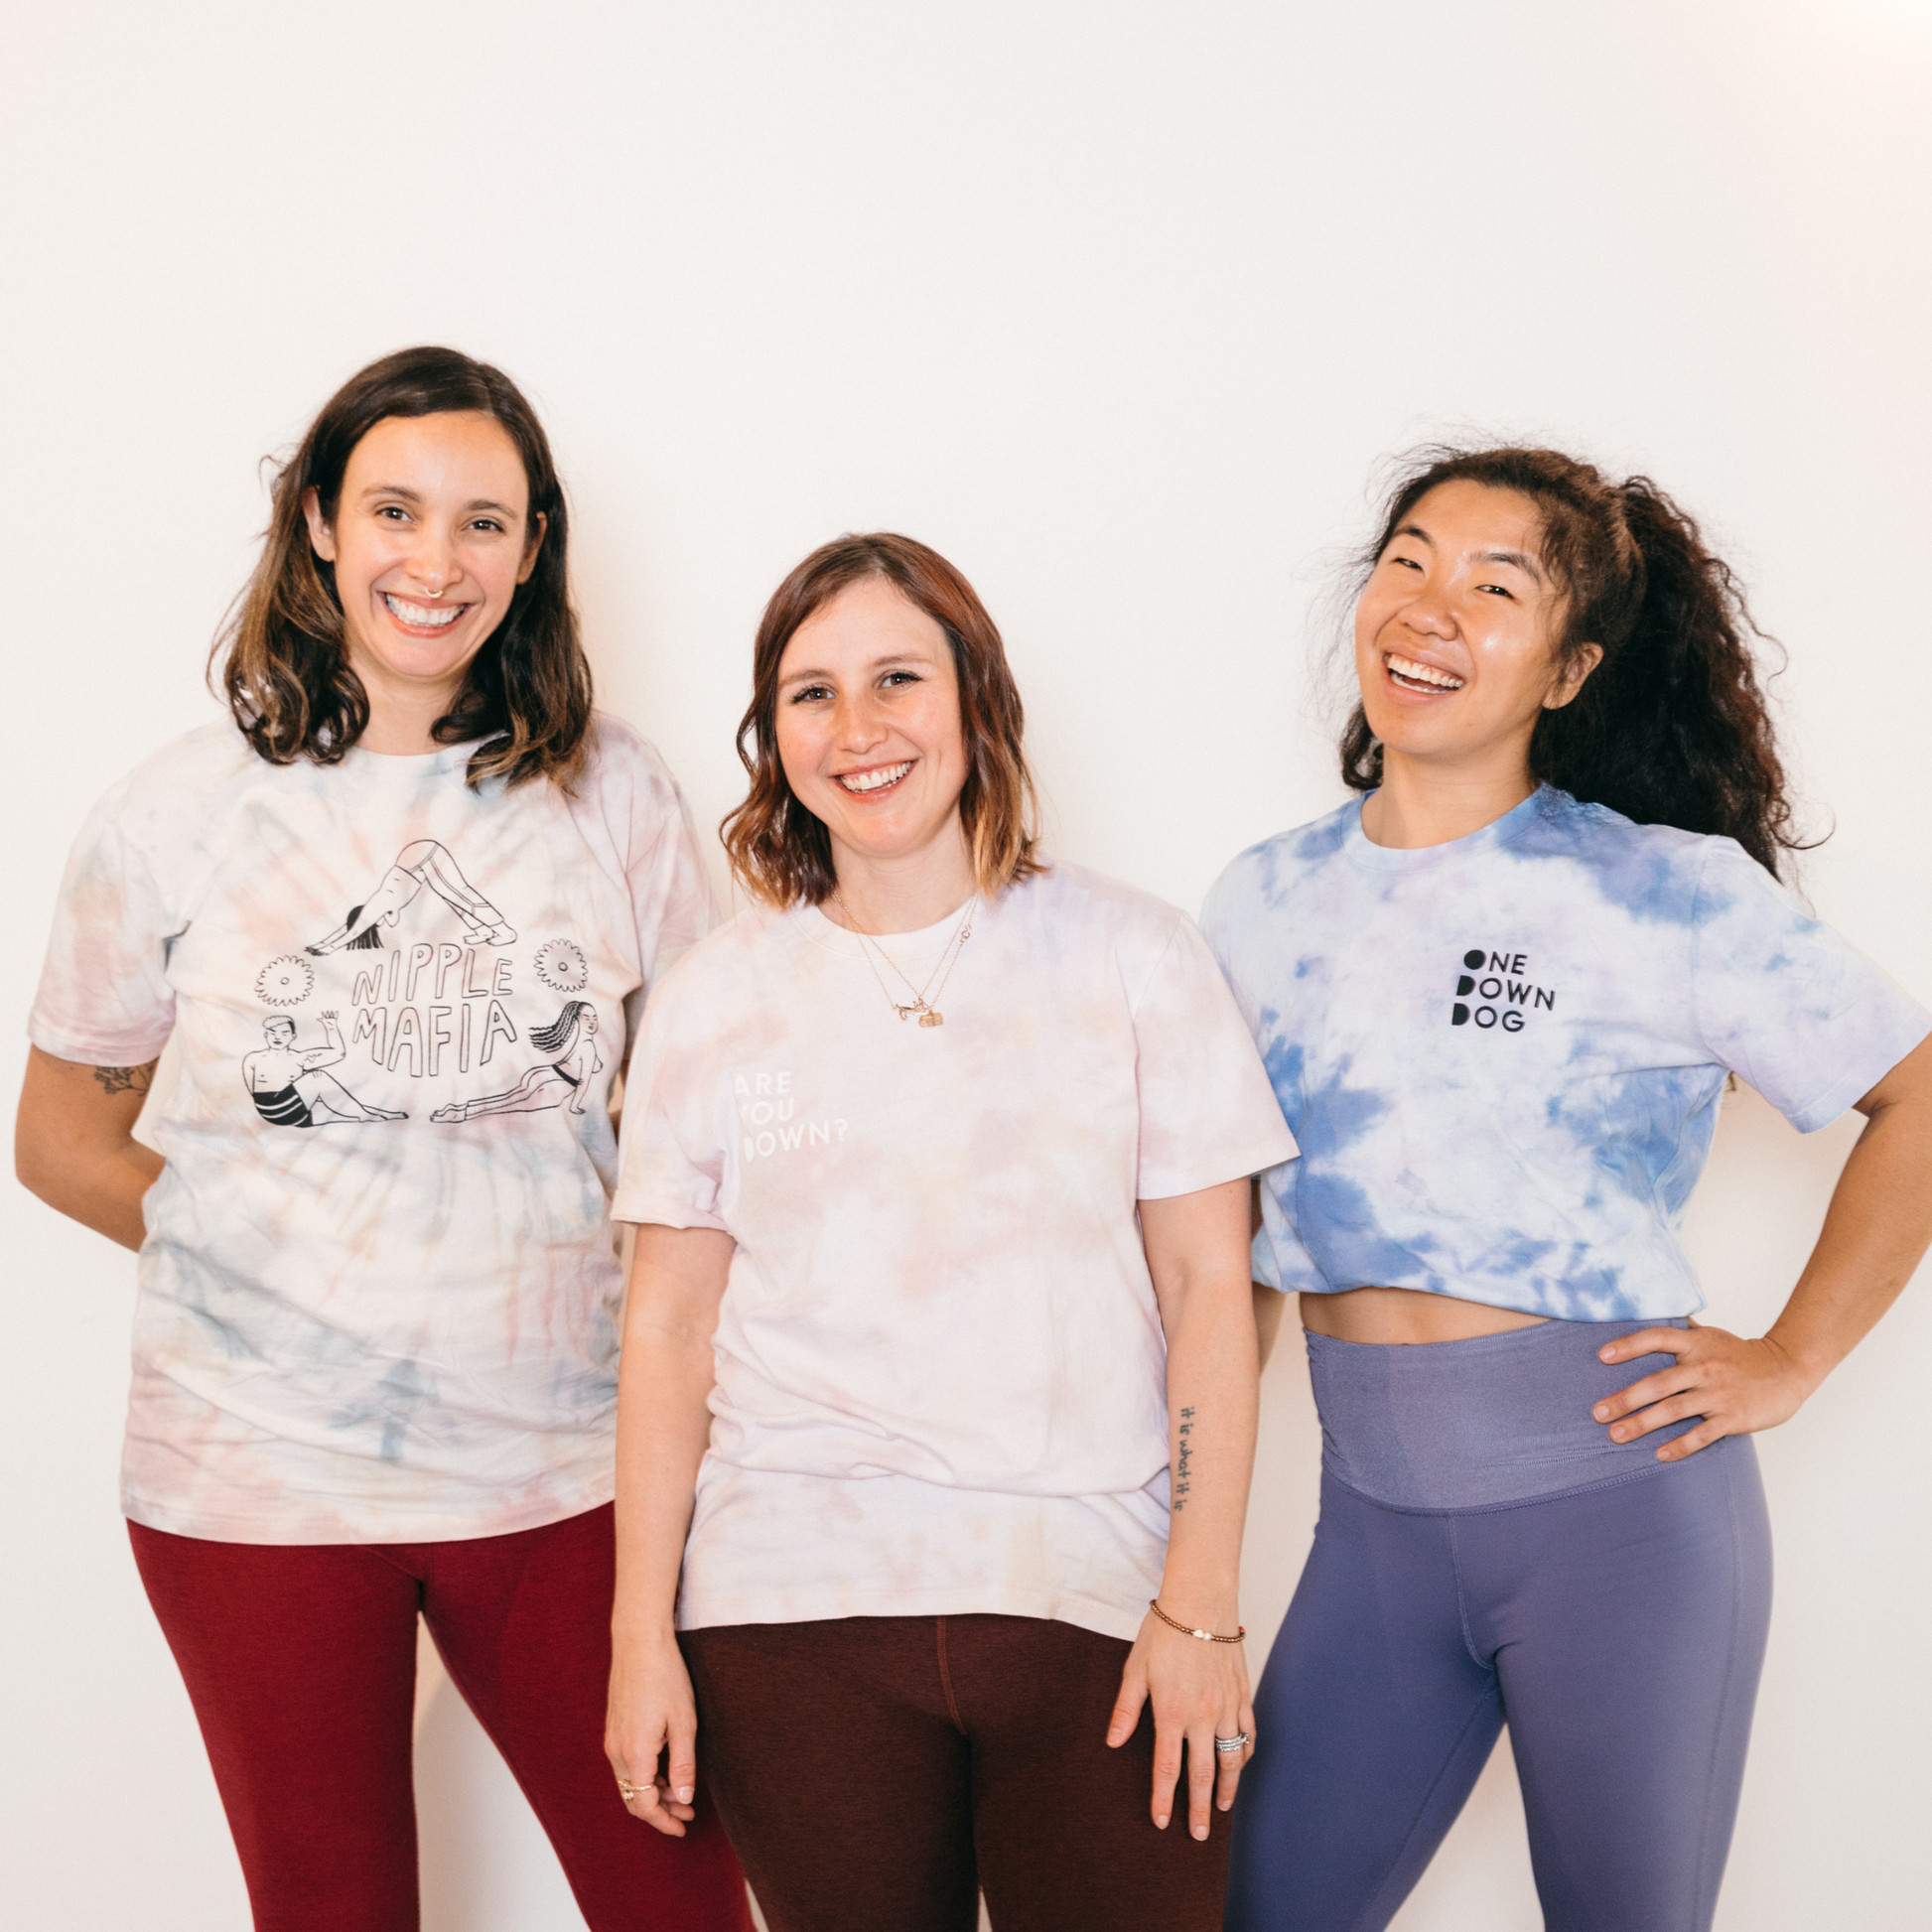 Trio wearing tie-dye tees with different logos and phrases